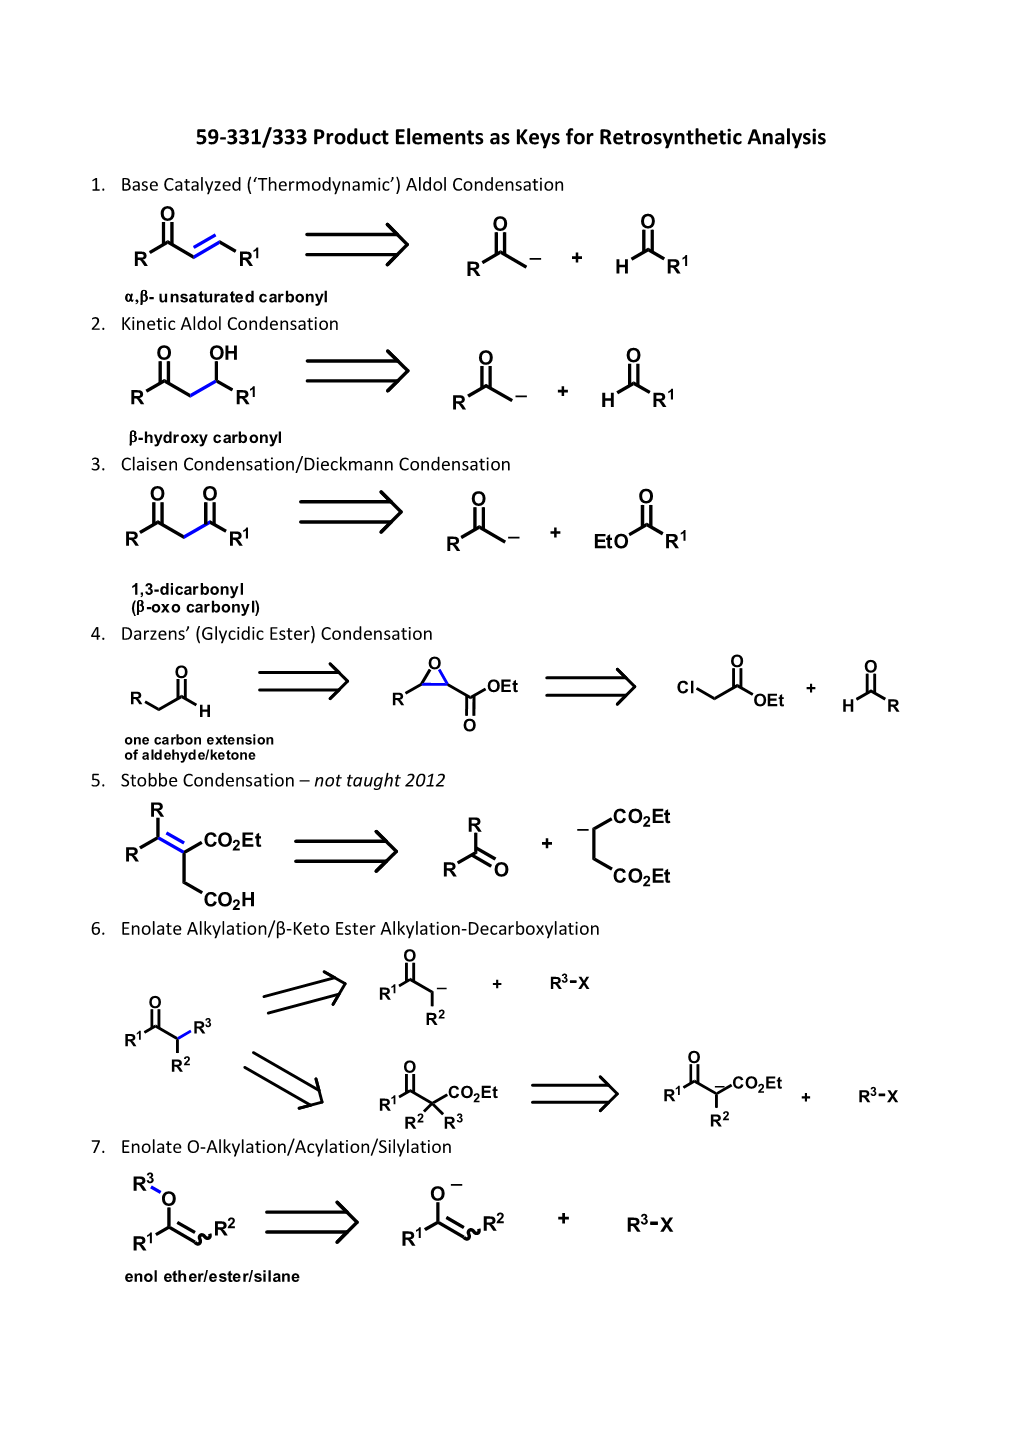 59-331/333 Product Elements As Keys for Retrosynthetic Analysis